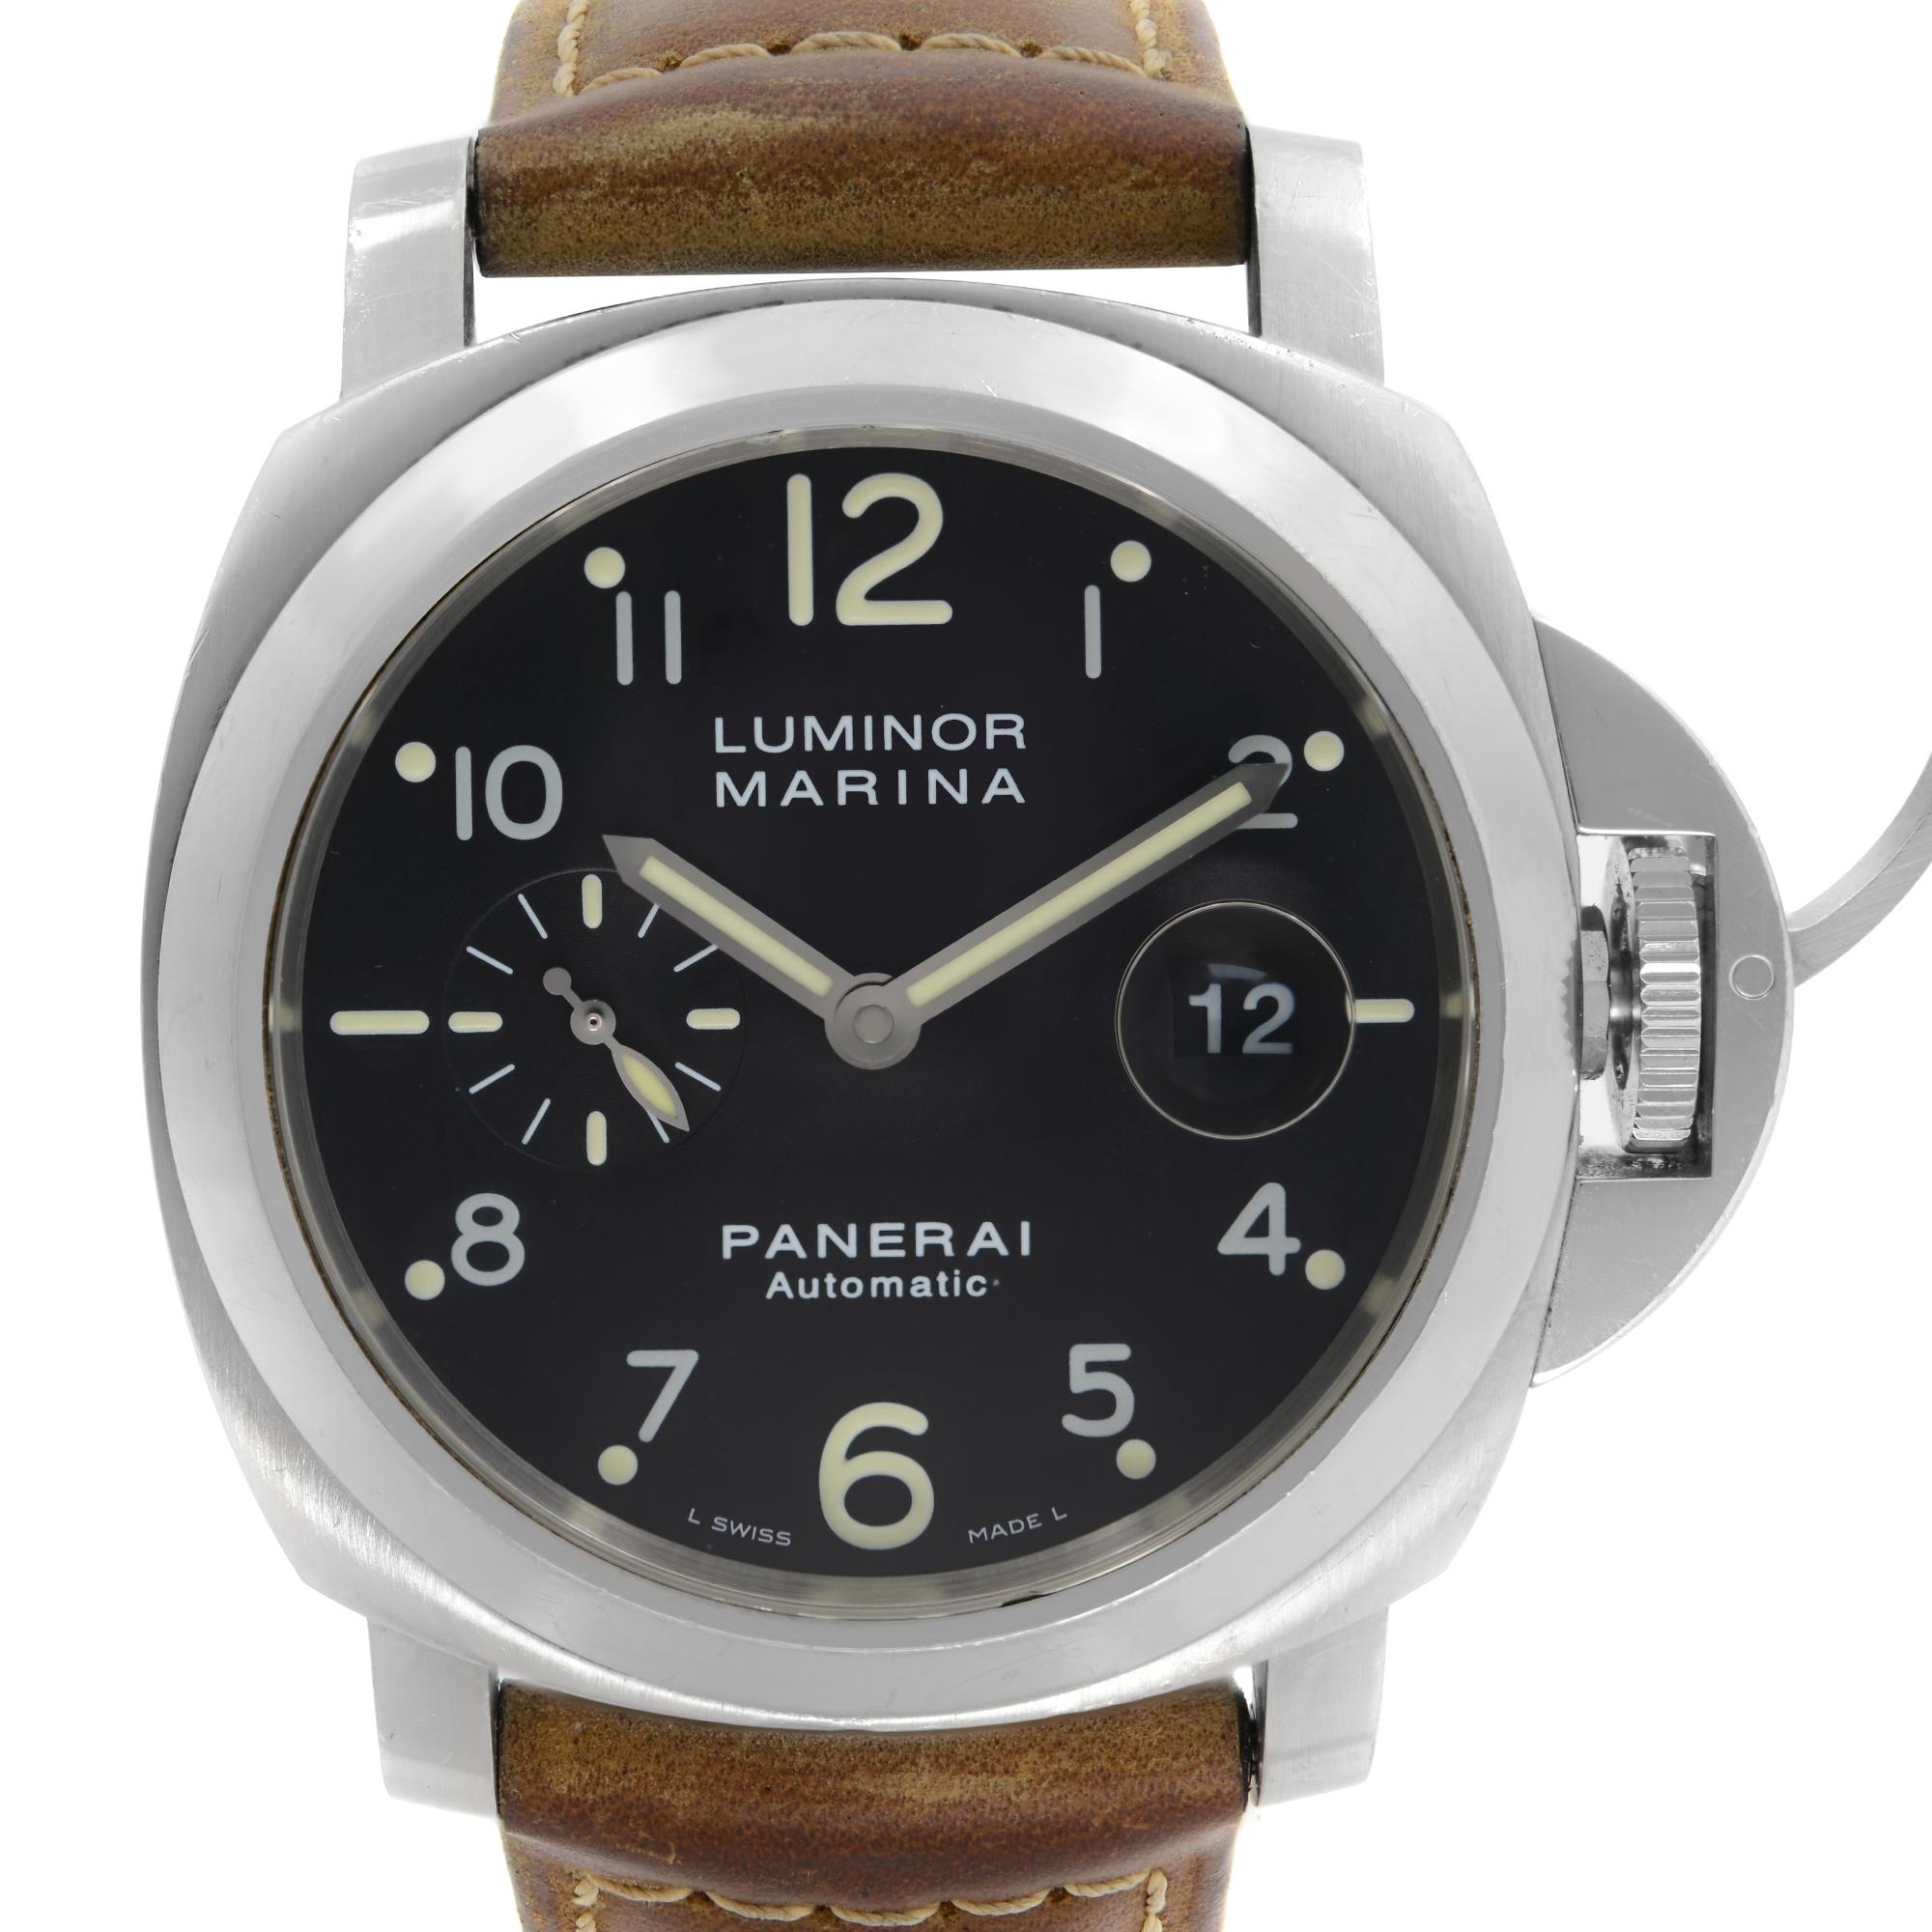 Pre-Owned Panerai Luminor Marina Steel 44 mm Black Dial Men's Automatic Watch PAM00164. This Beautiful Timepiece Features: Stainless Steel Case with a Two-Piece Brown Leather Strap. Fixed Polished Stainless Steel Bezel. Black Dial with Luminous